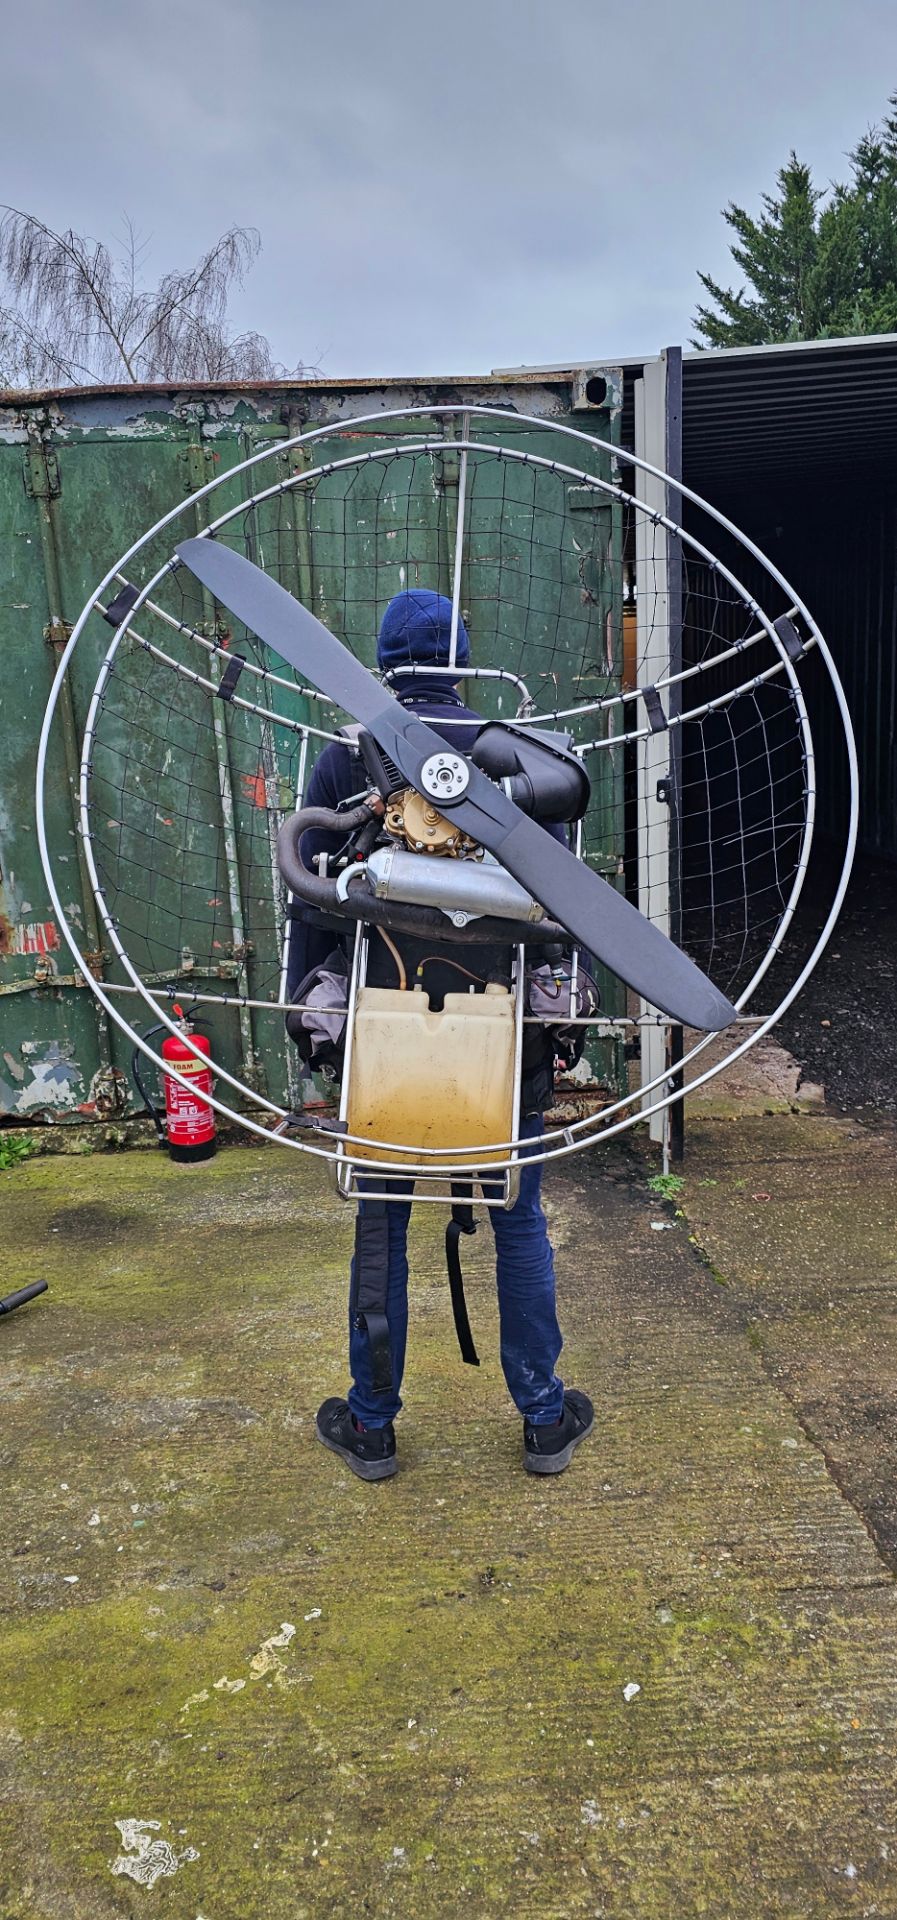 A paramotor with seat, for attachment to a hang glider or similar. Please note, we have not tested